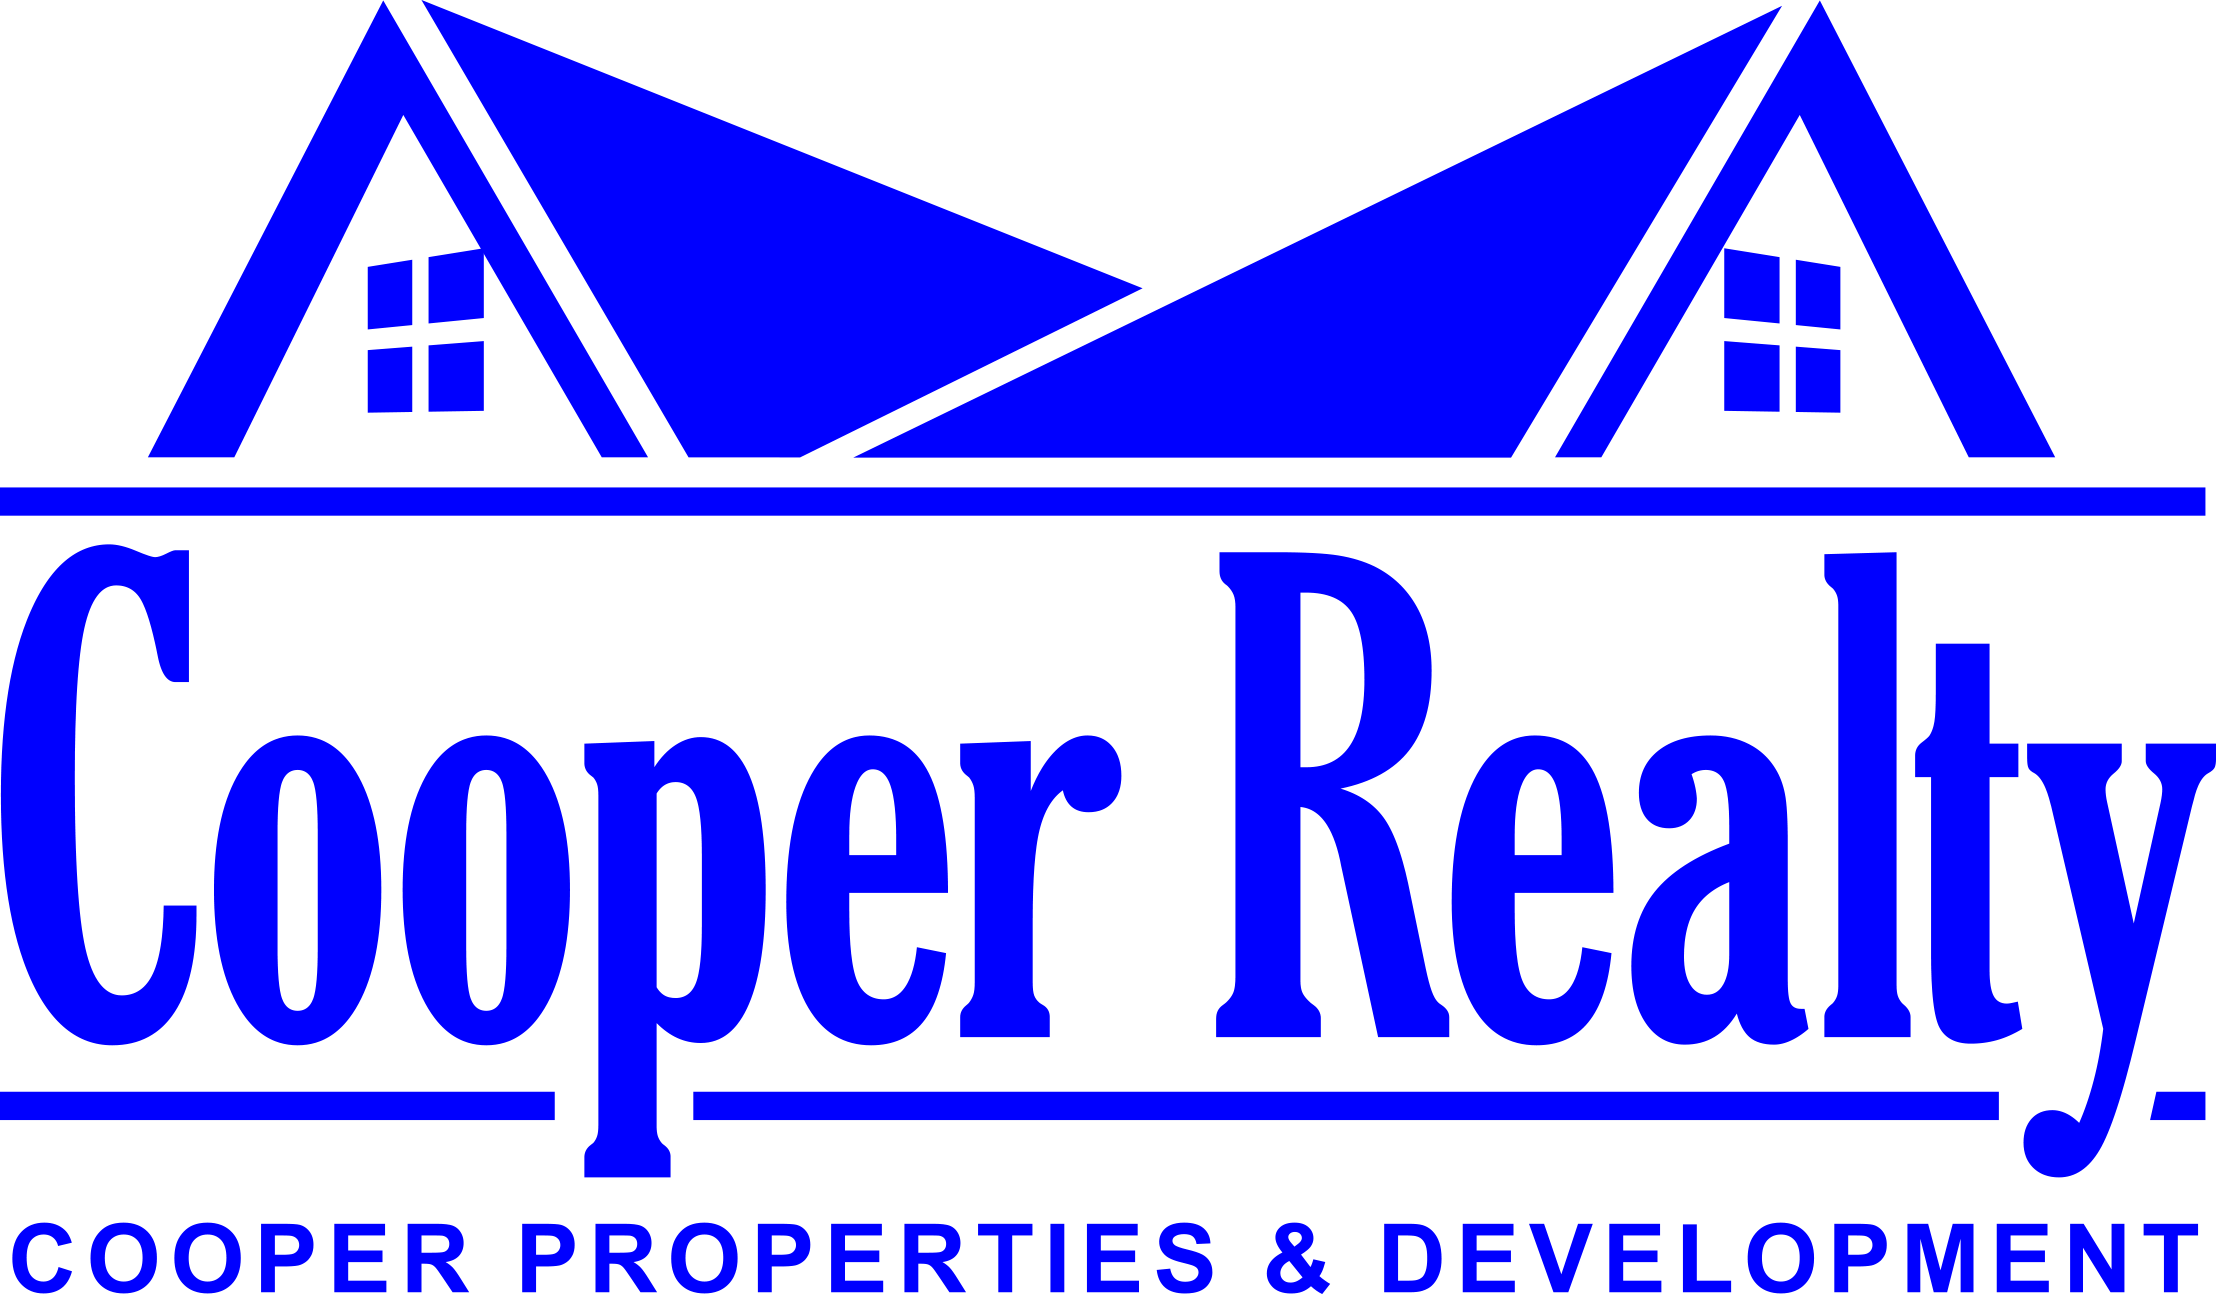 COOPER REALTY